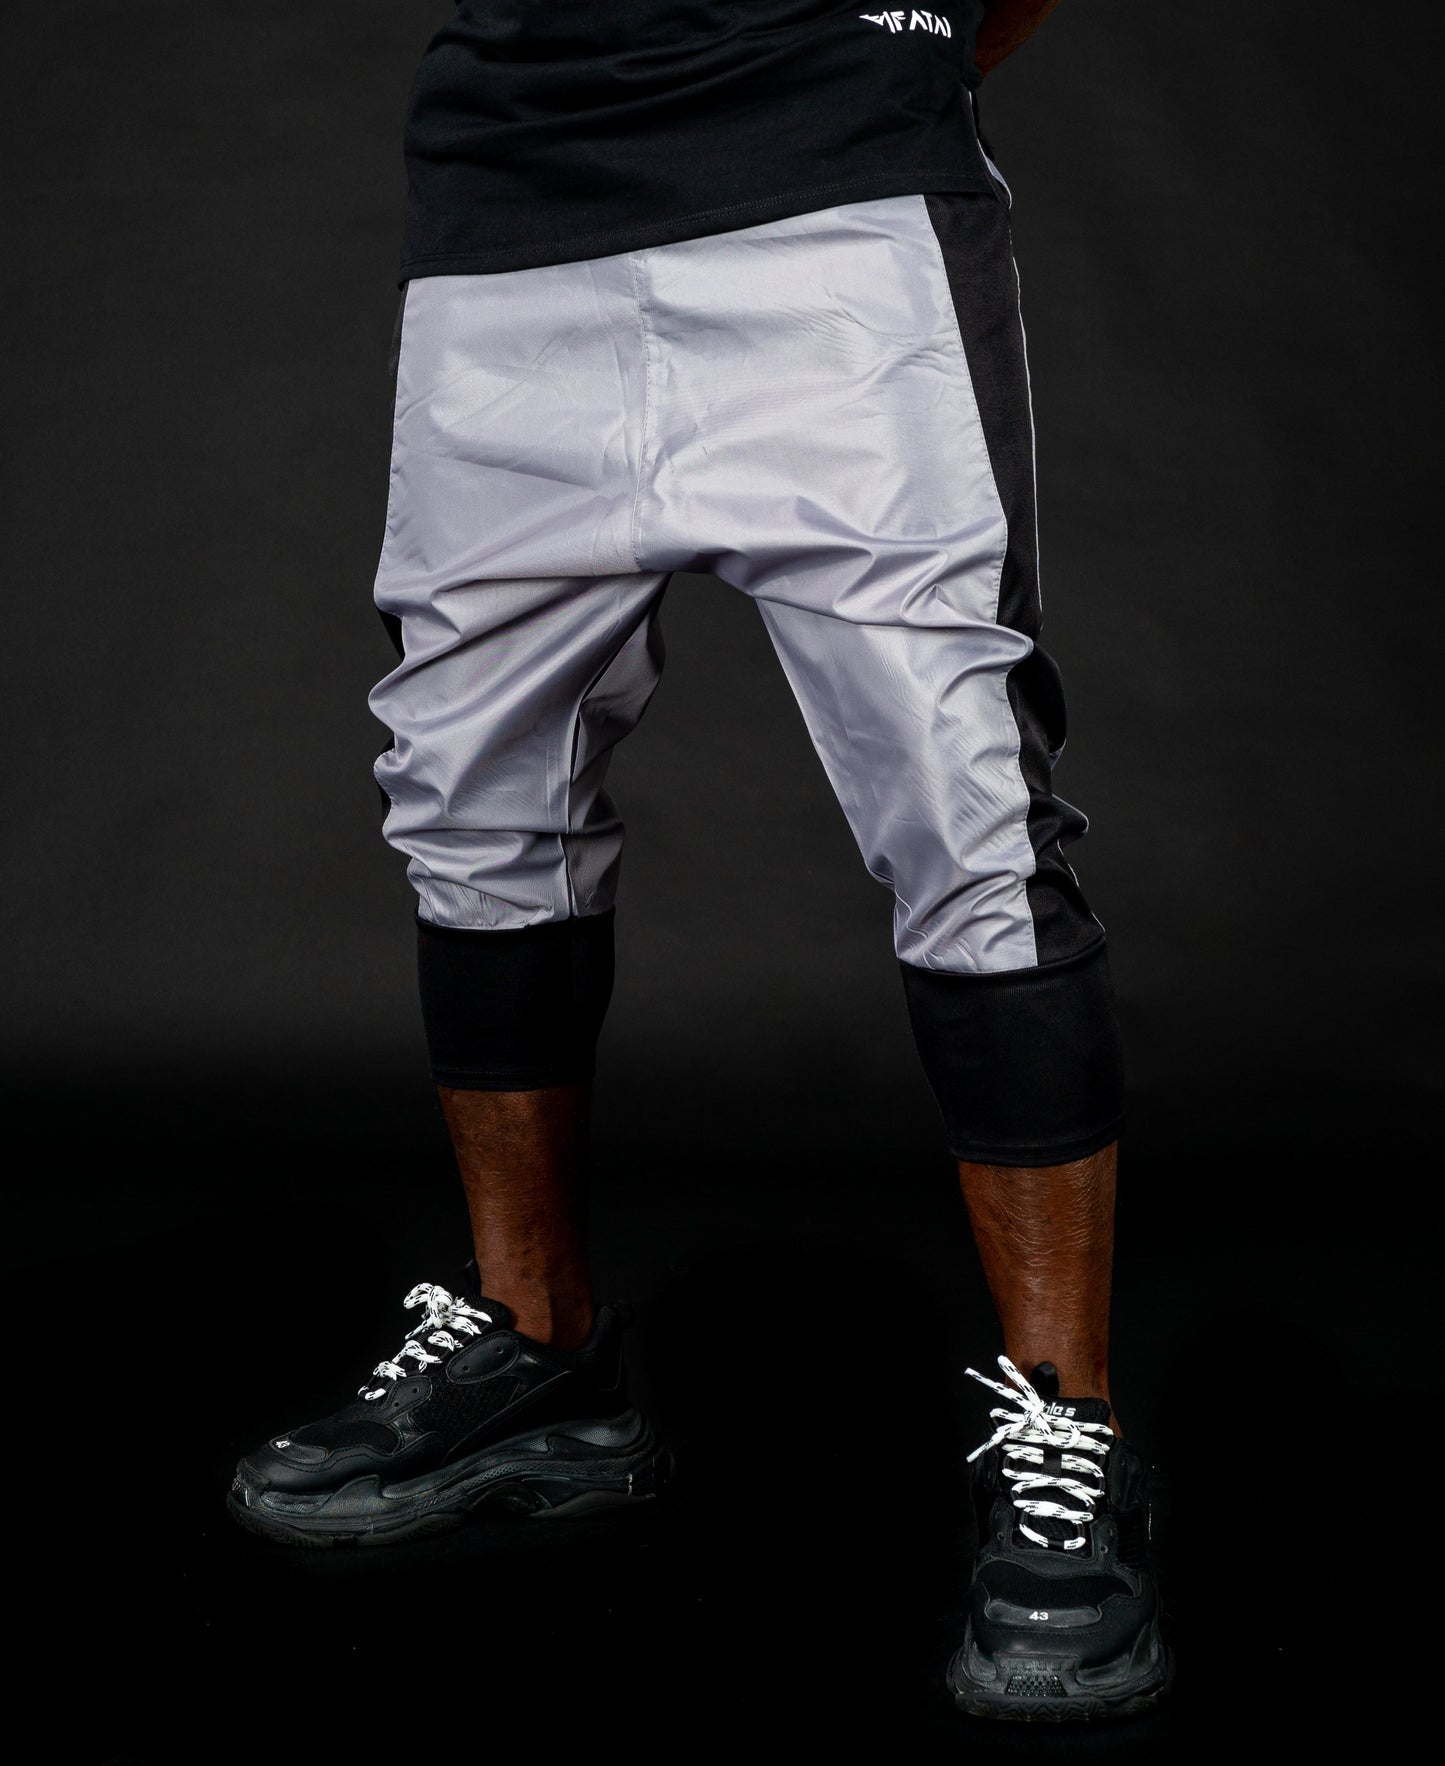 Short trousers black and grey - Fatai Style